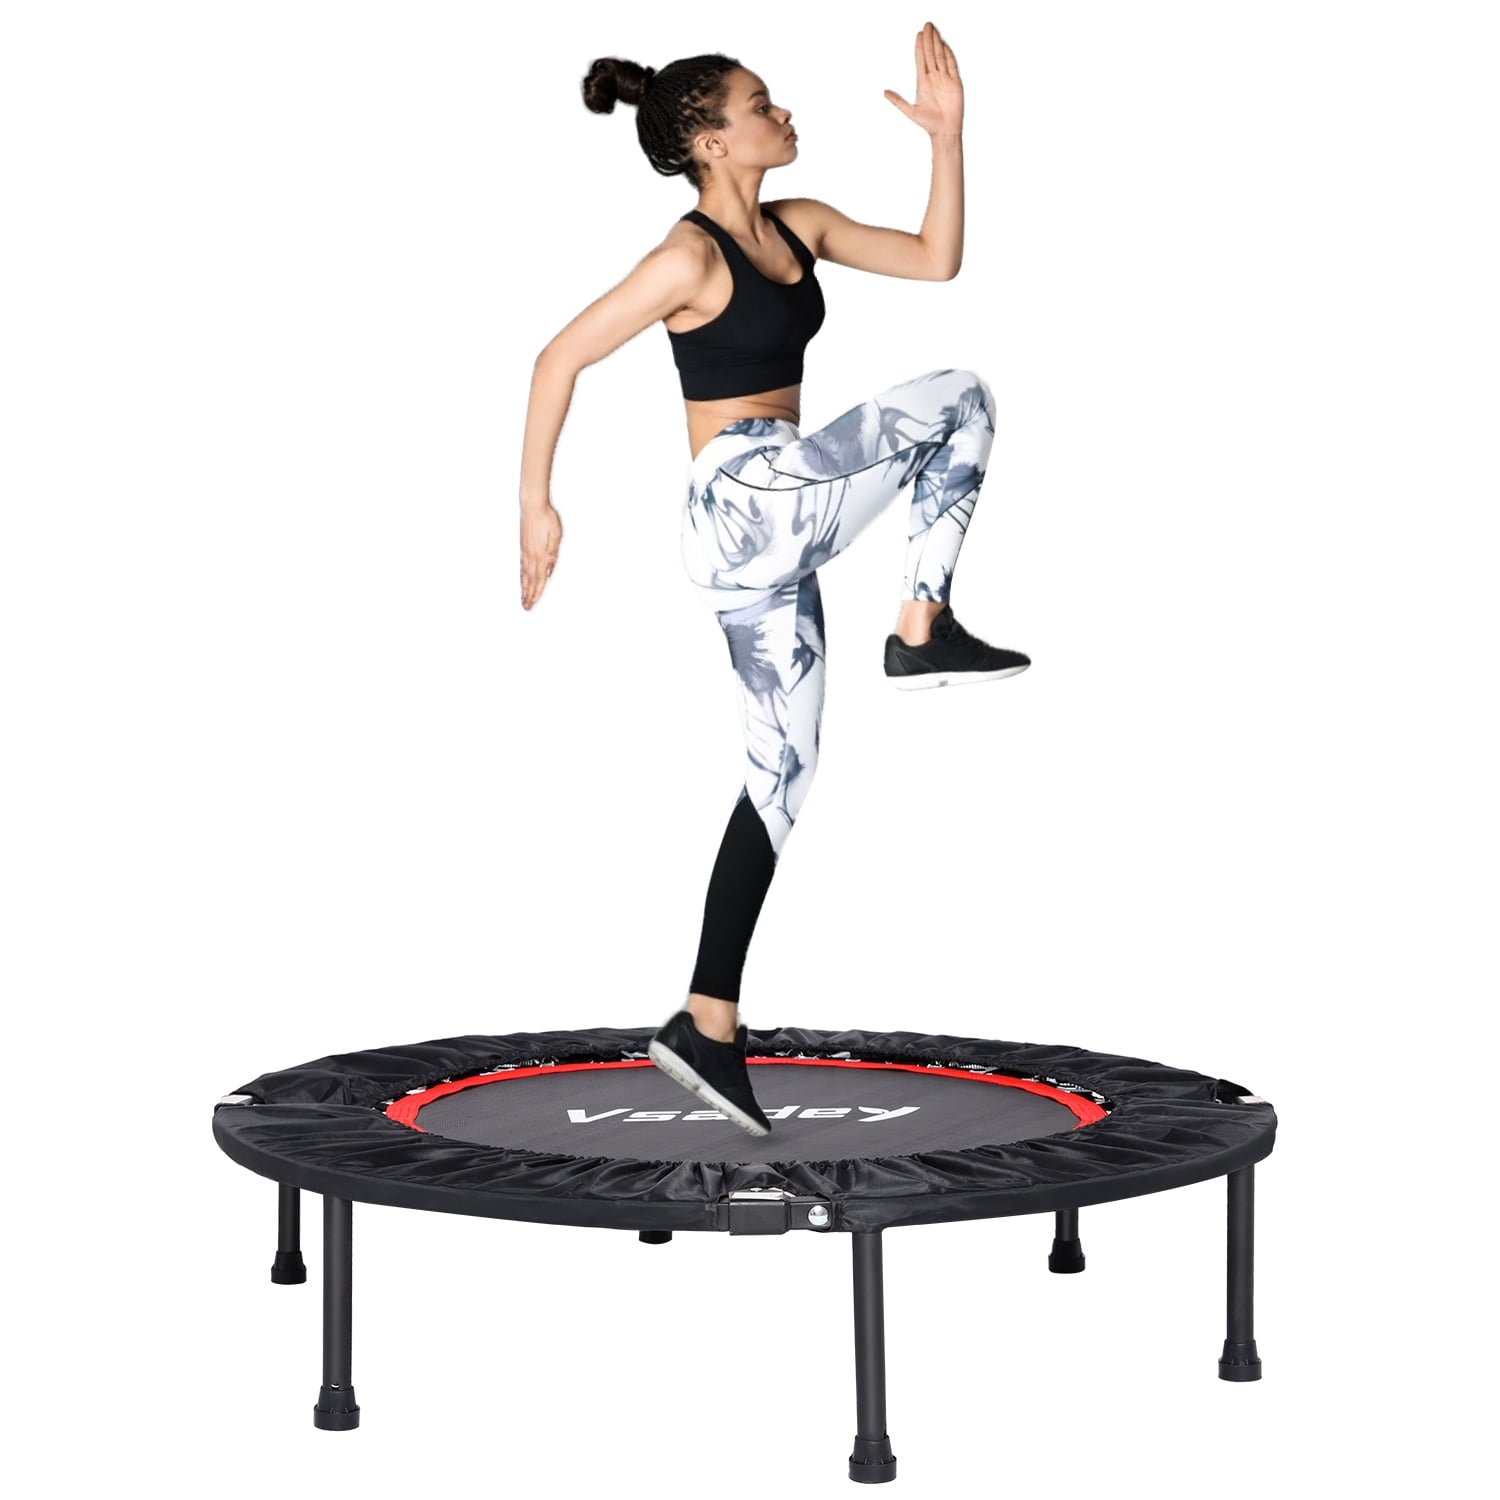 Stable & Quiet Exercise Rebounders Mini Trampolines for Adults Kids Indoor/Garden Workout Equipment Vsadey Foldable Mini Trampoline 40 Inch Easy Assembly Max Load 330lbs Indoor Fitness Trampoline